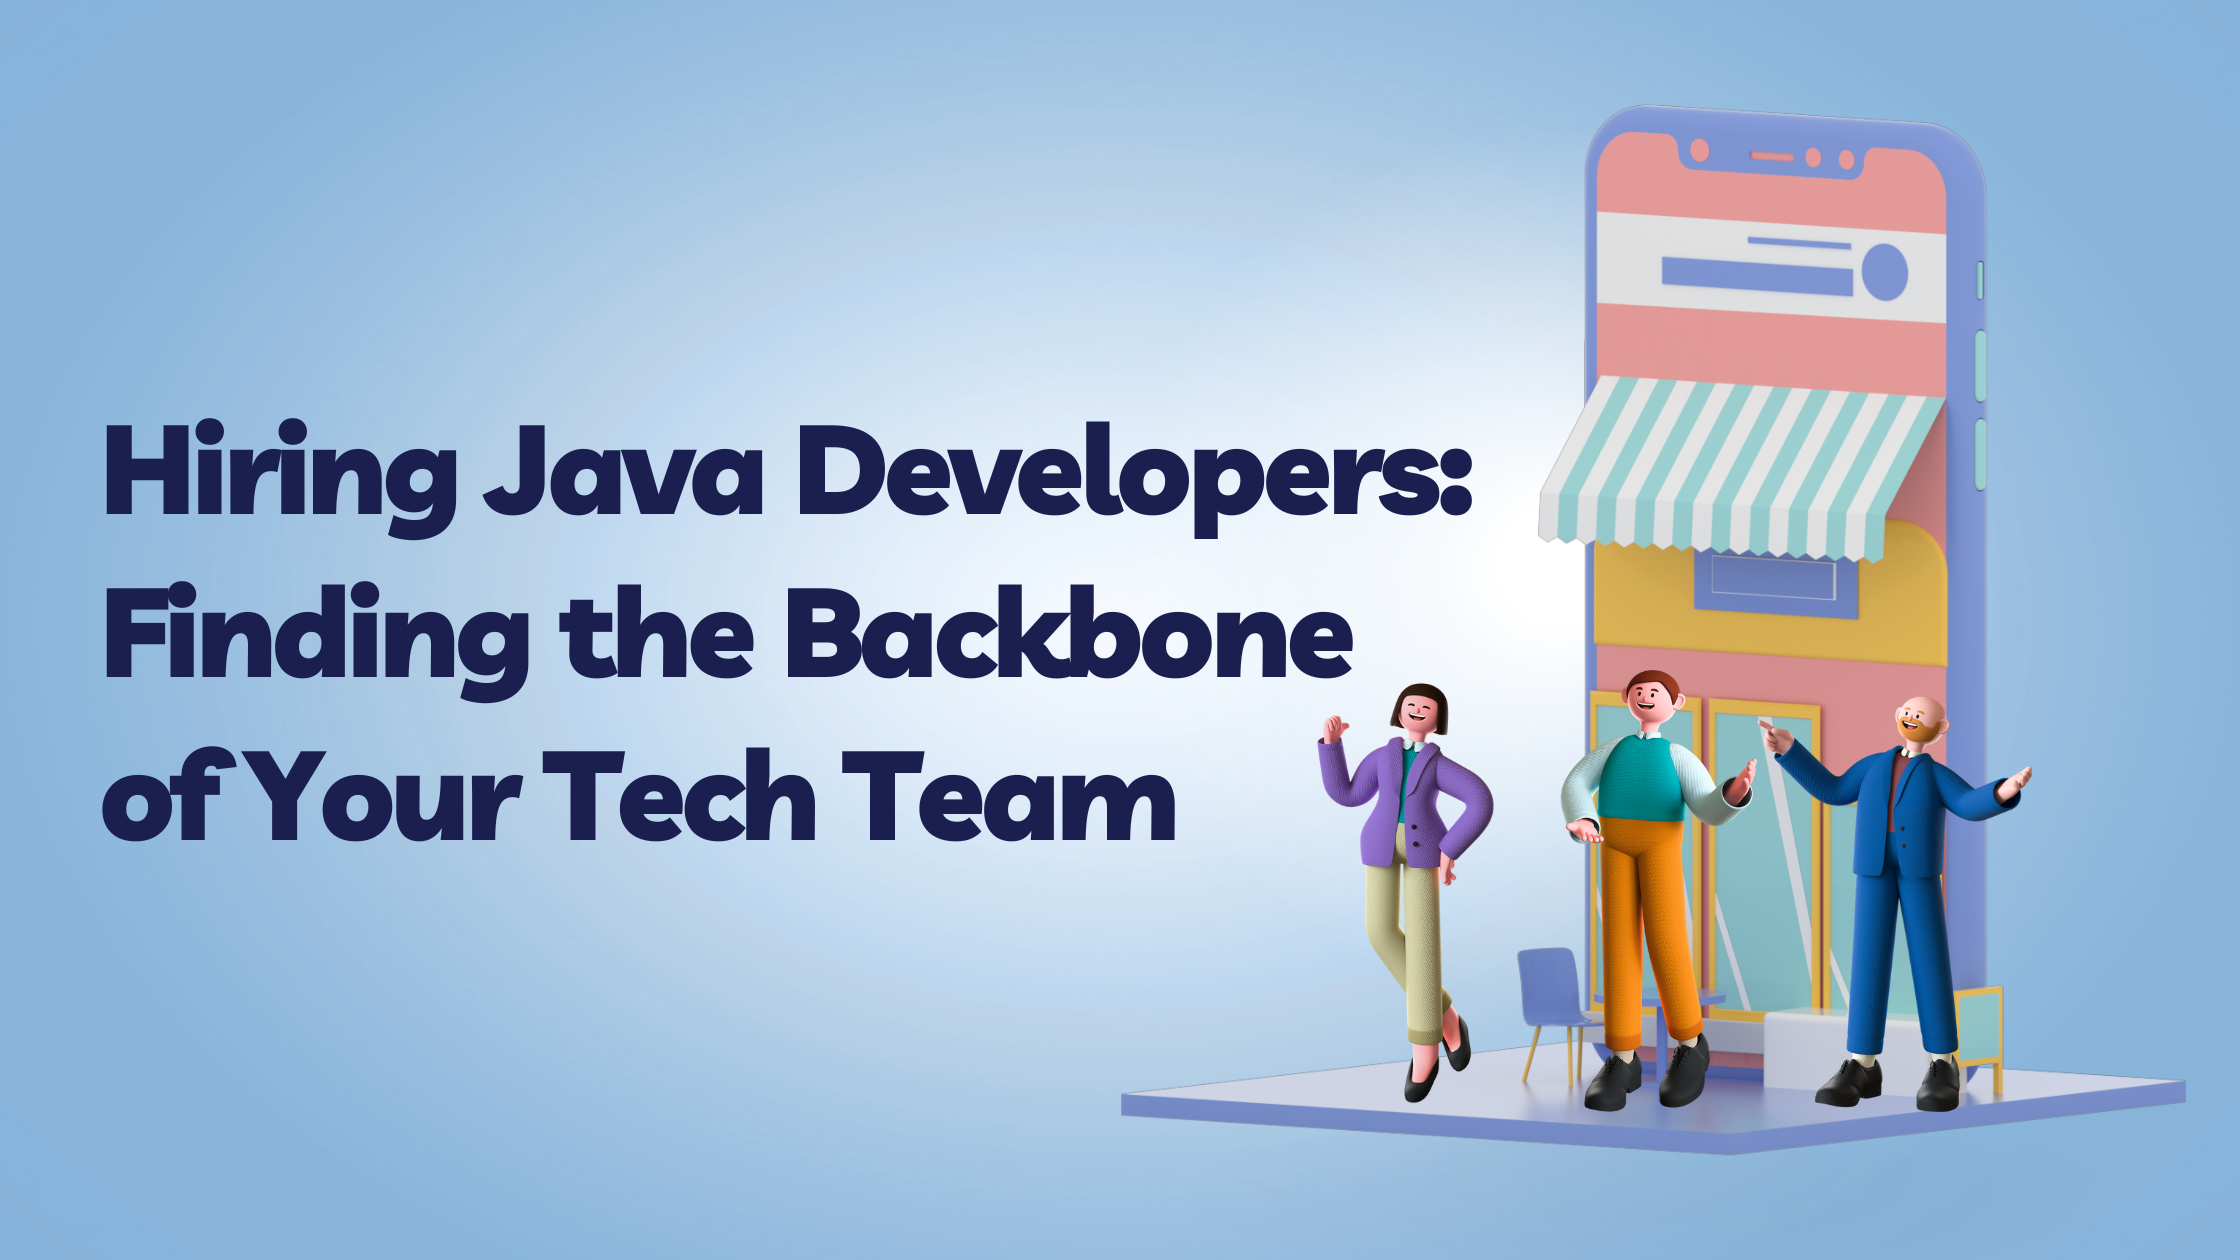 Hiring Java Developers: Finding the Backbone of Your Tech Team